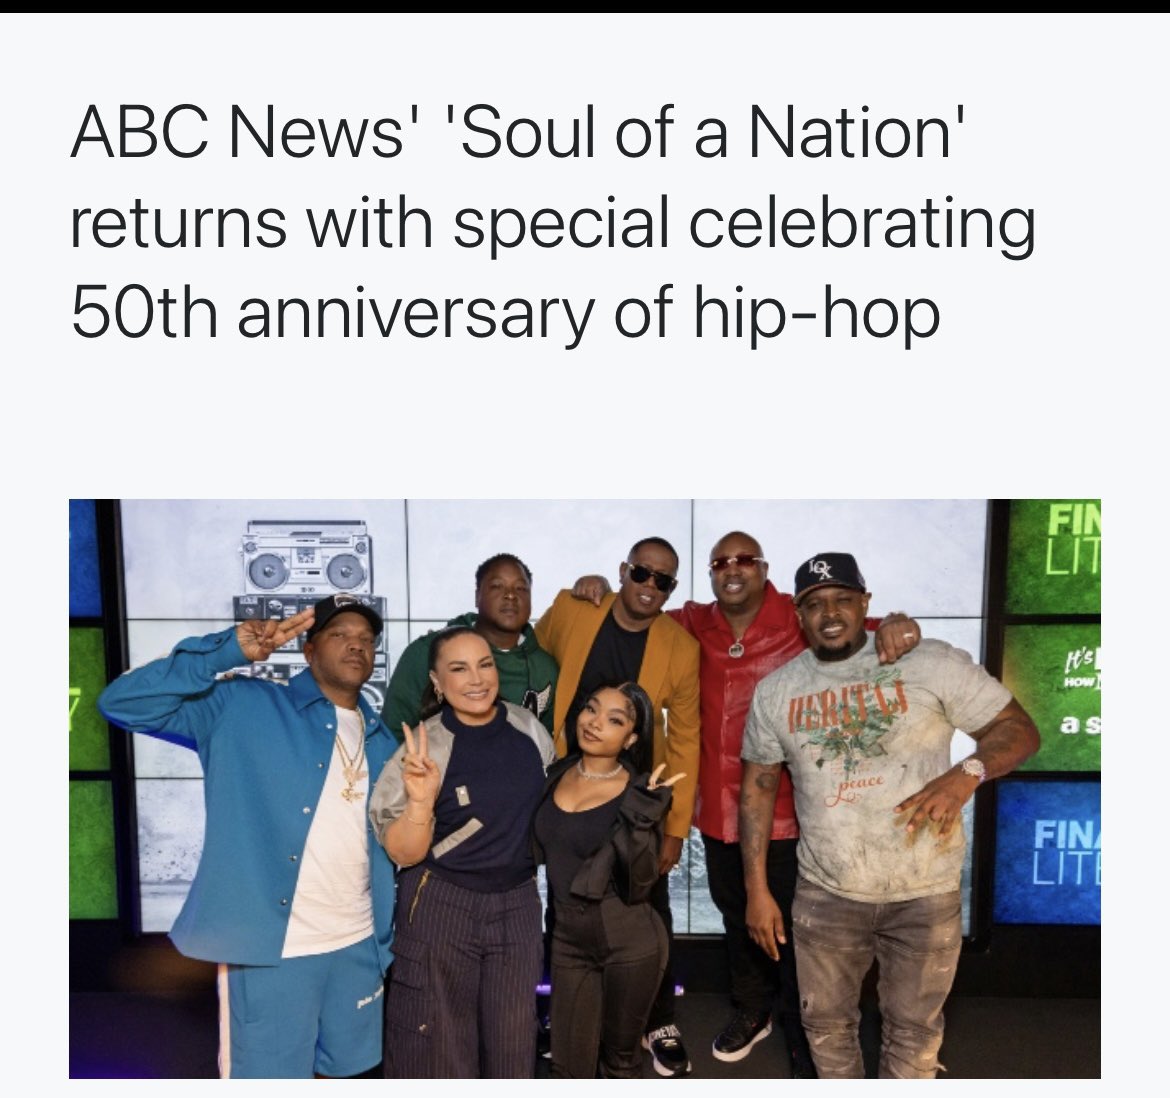 News Flash: tonight on @ABCNetwork and on Hulu another @SoulofaNation celebrates Juneteenth and 50 years of Hip Hop!! I never miss a Soul of a nation special